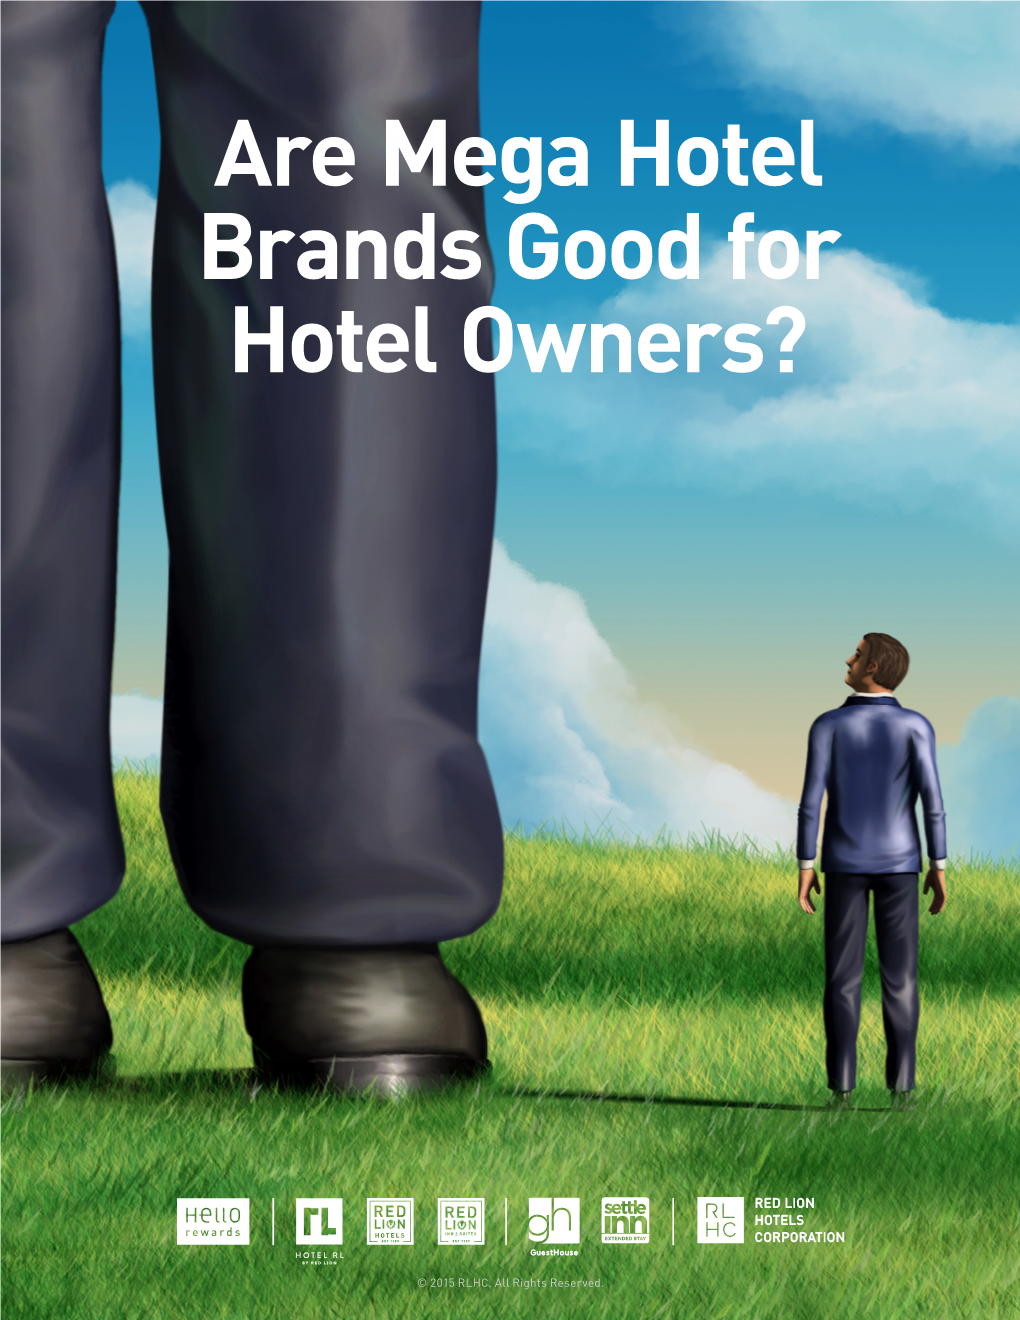 Are Mega Hotel Brands Good for Hotel Owners?